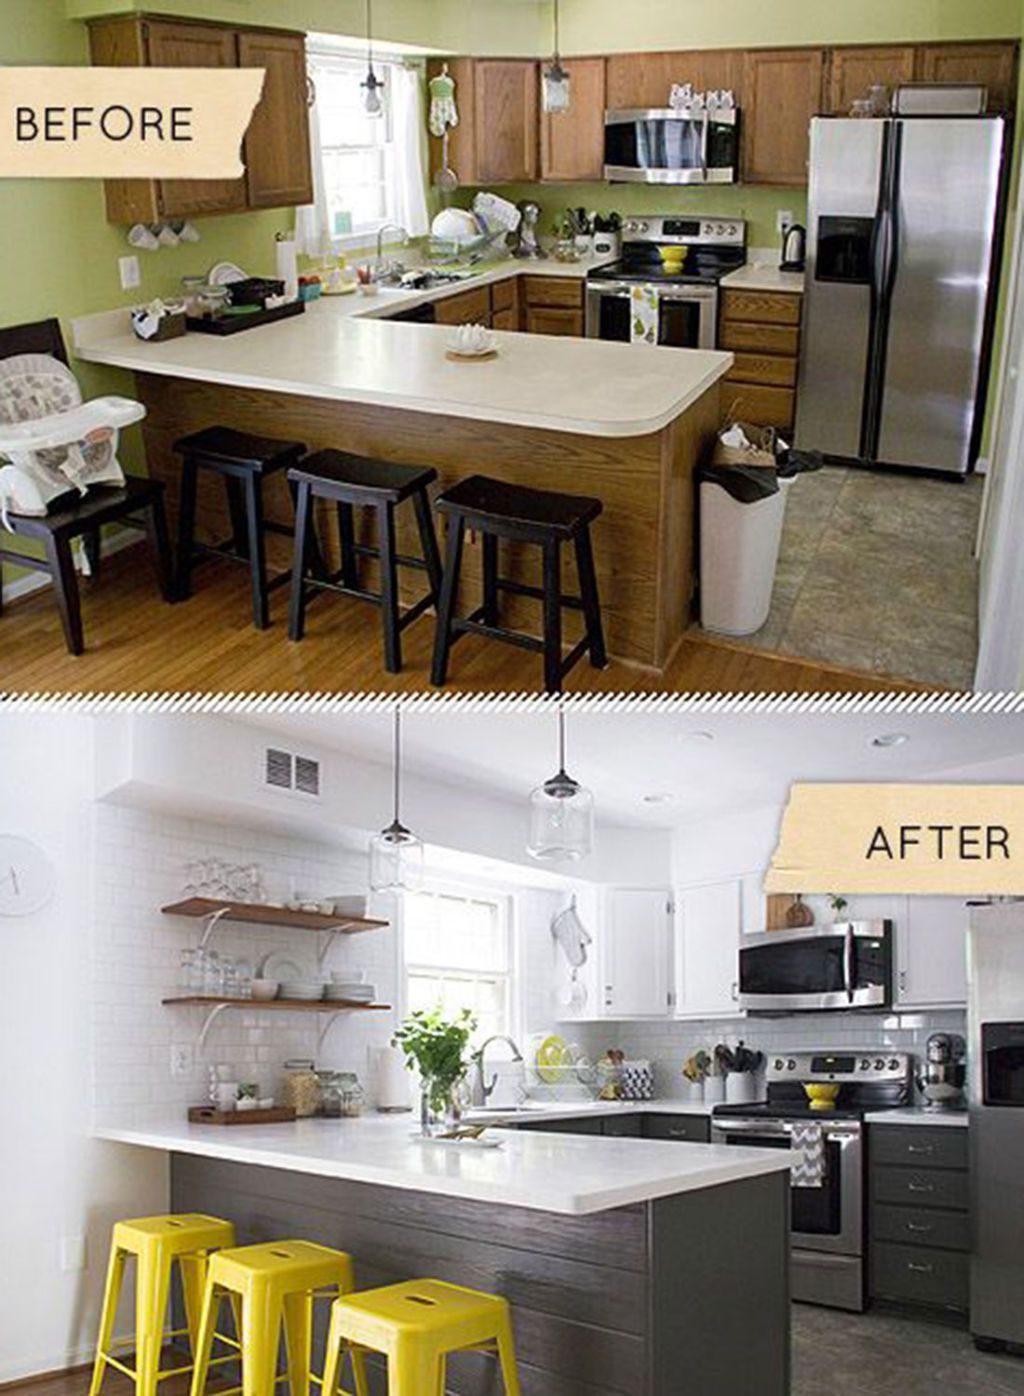 Furniture Tips For Home Makeovers And Renovations